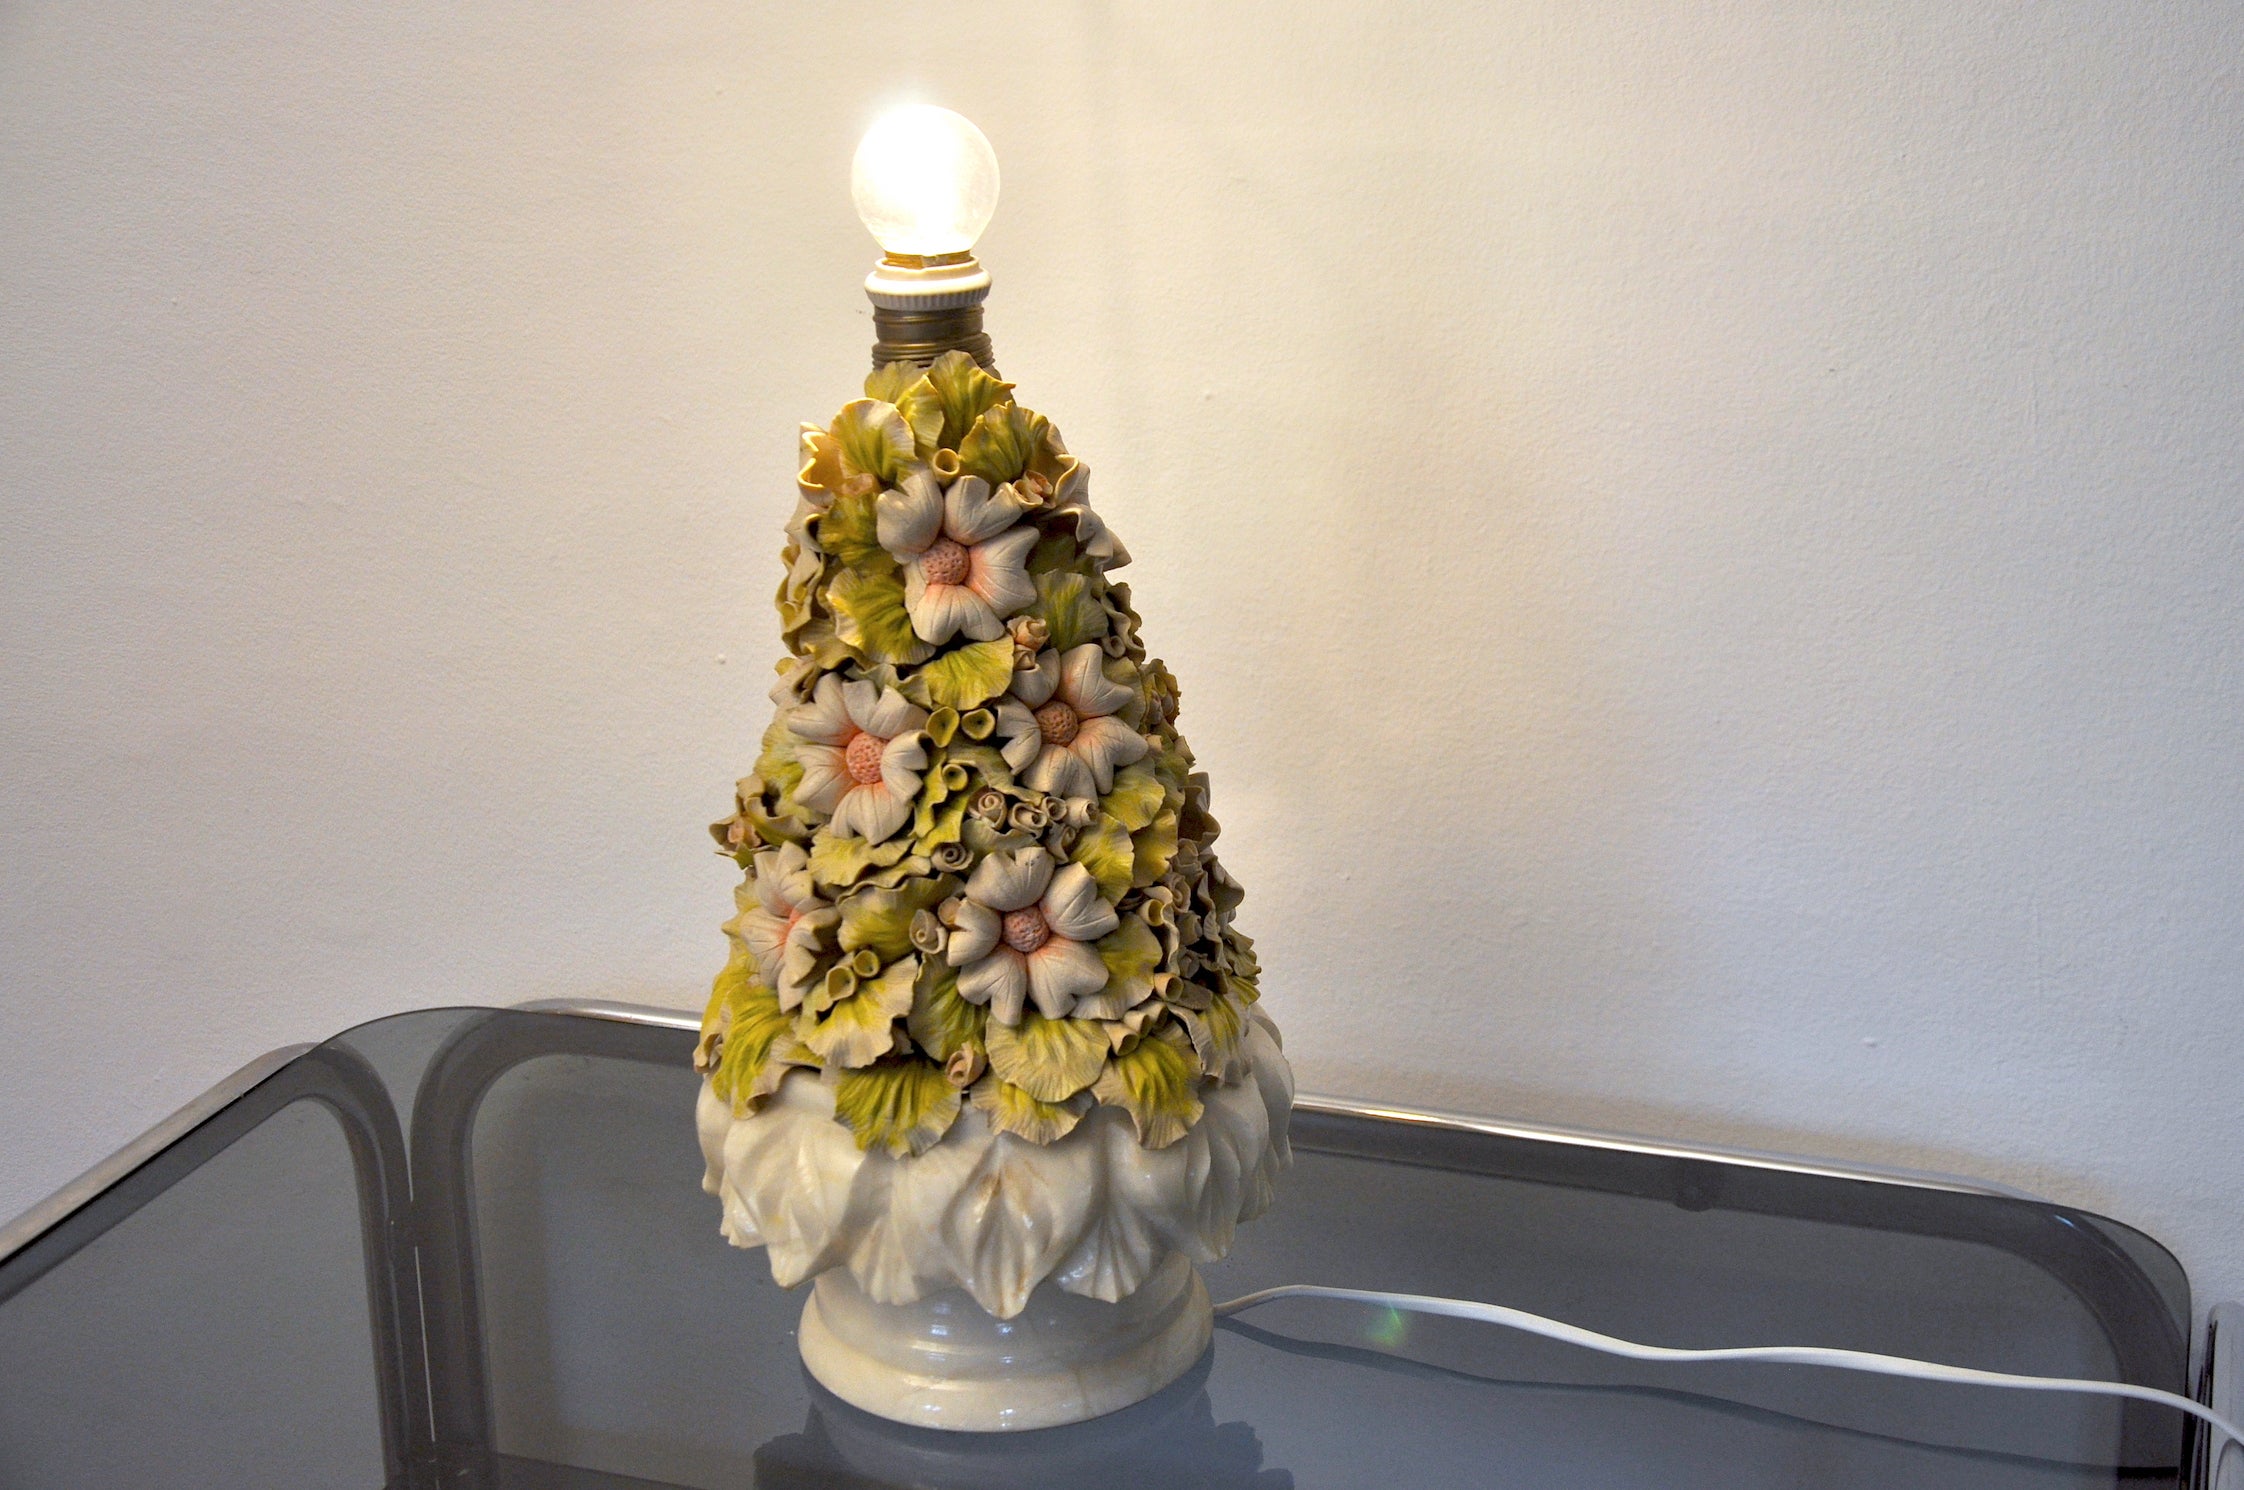 Very beautiful artisanal lamp dating from the 1960s, produced in Spain by the Manises brand. Alabaster base, all the floral details were made and painted by hand. Defects are visible on the photos but do not detract from the unique aesthetics of